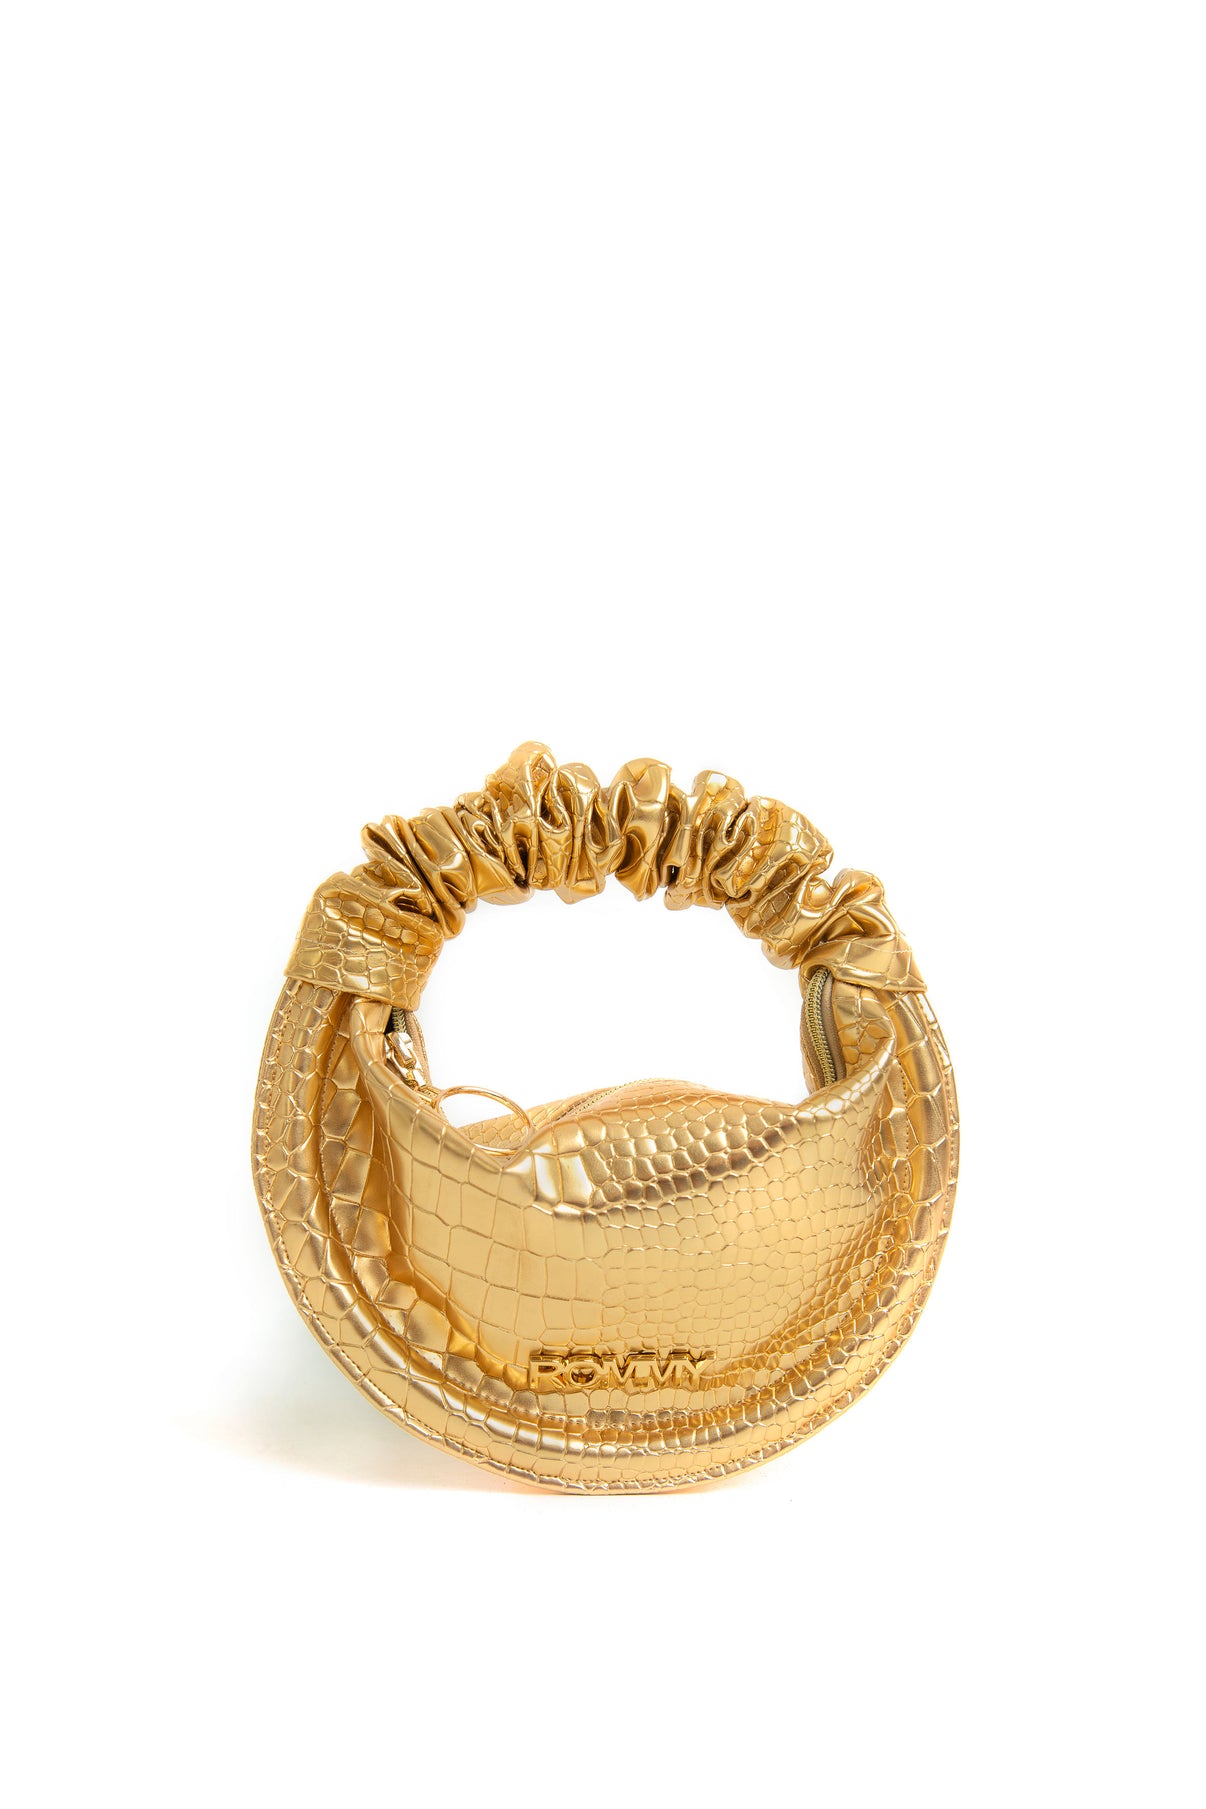 Gold Croc Bag - Various Sizes – Rommy Accessories